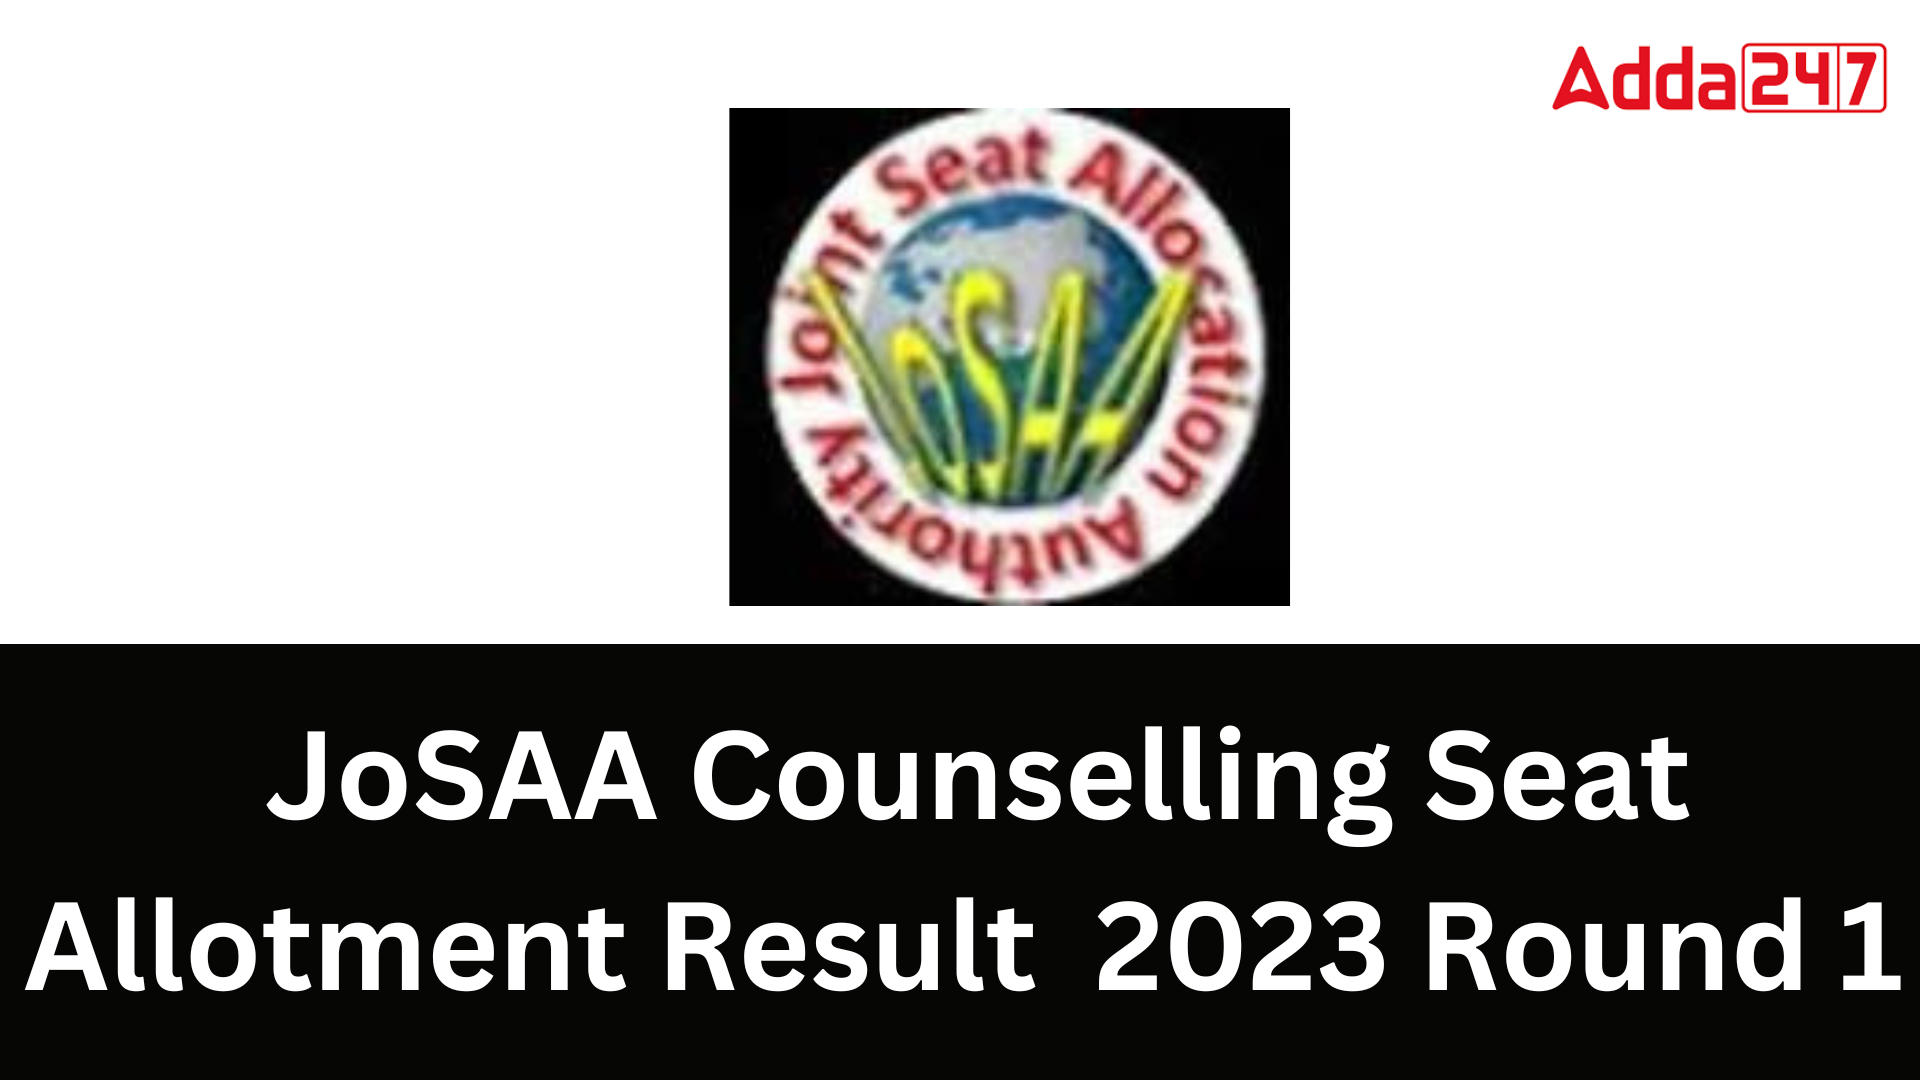 JoSAA Counselling Seat Allotment Result  2023 Round 1  